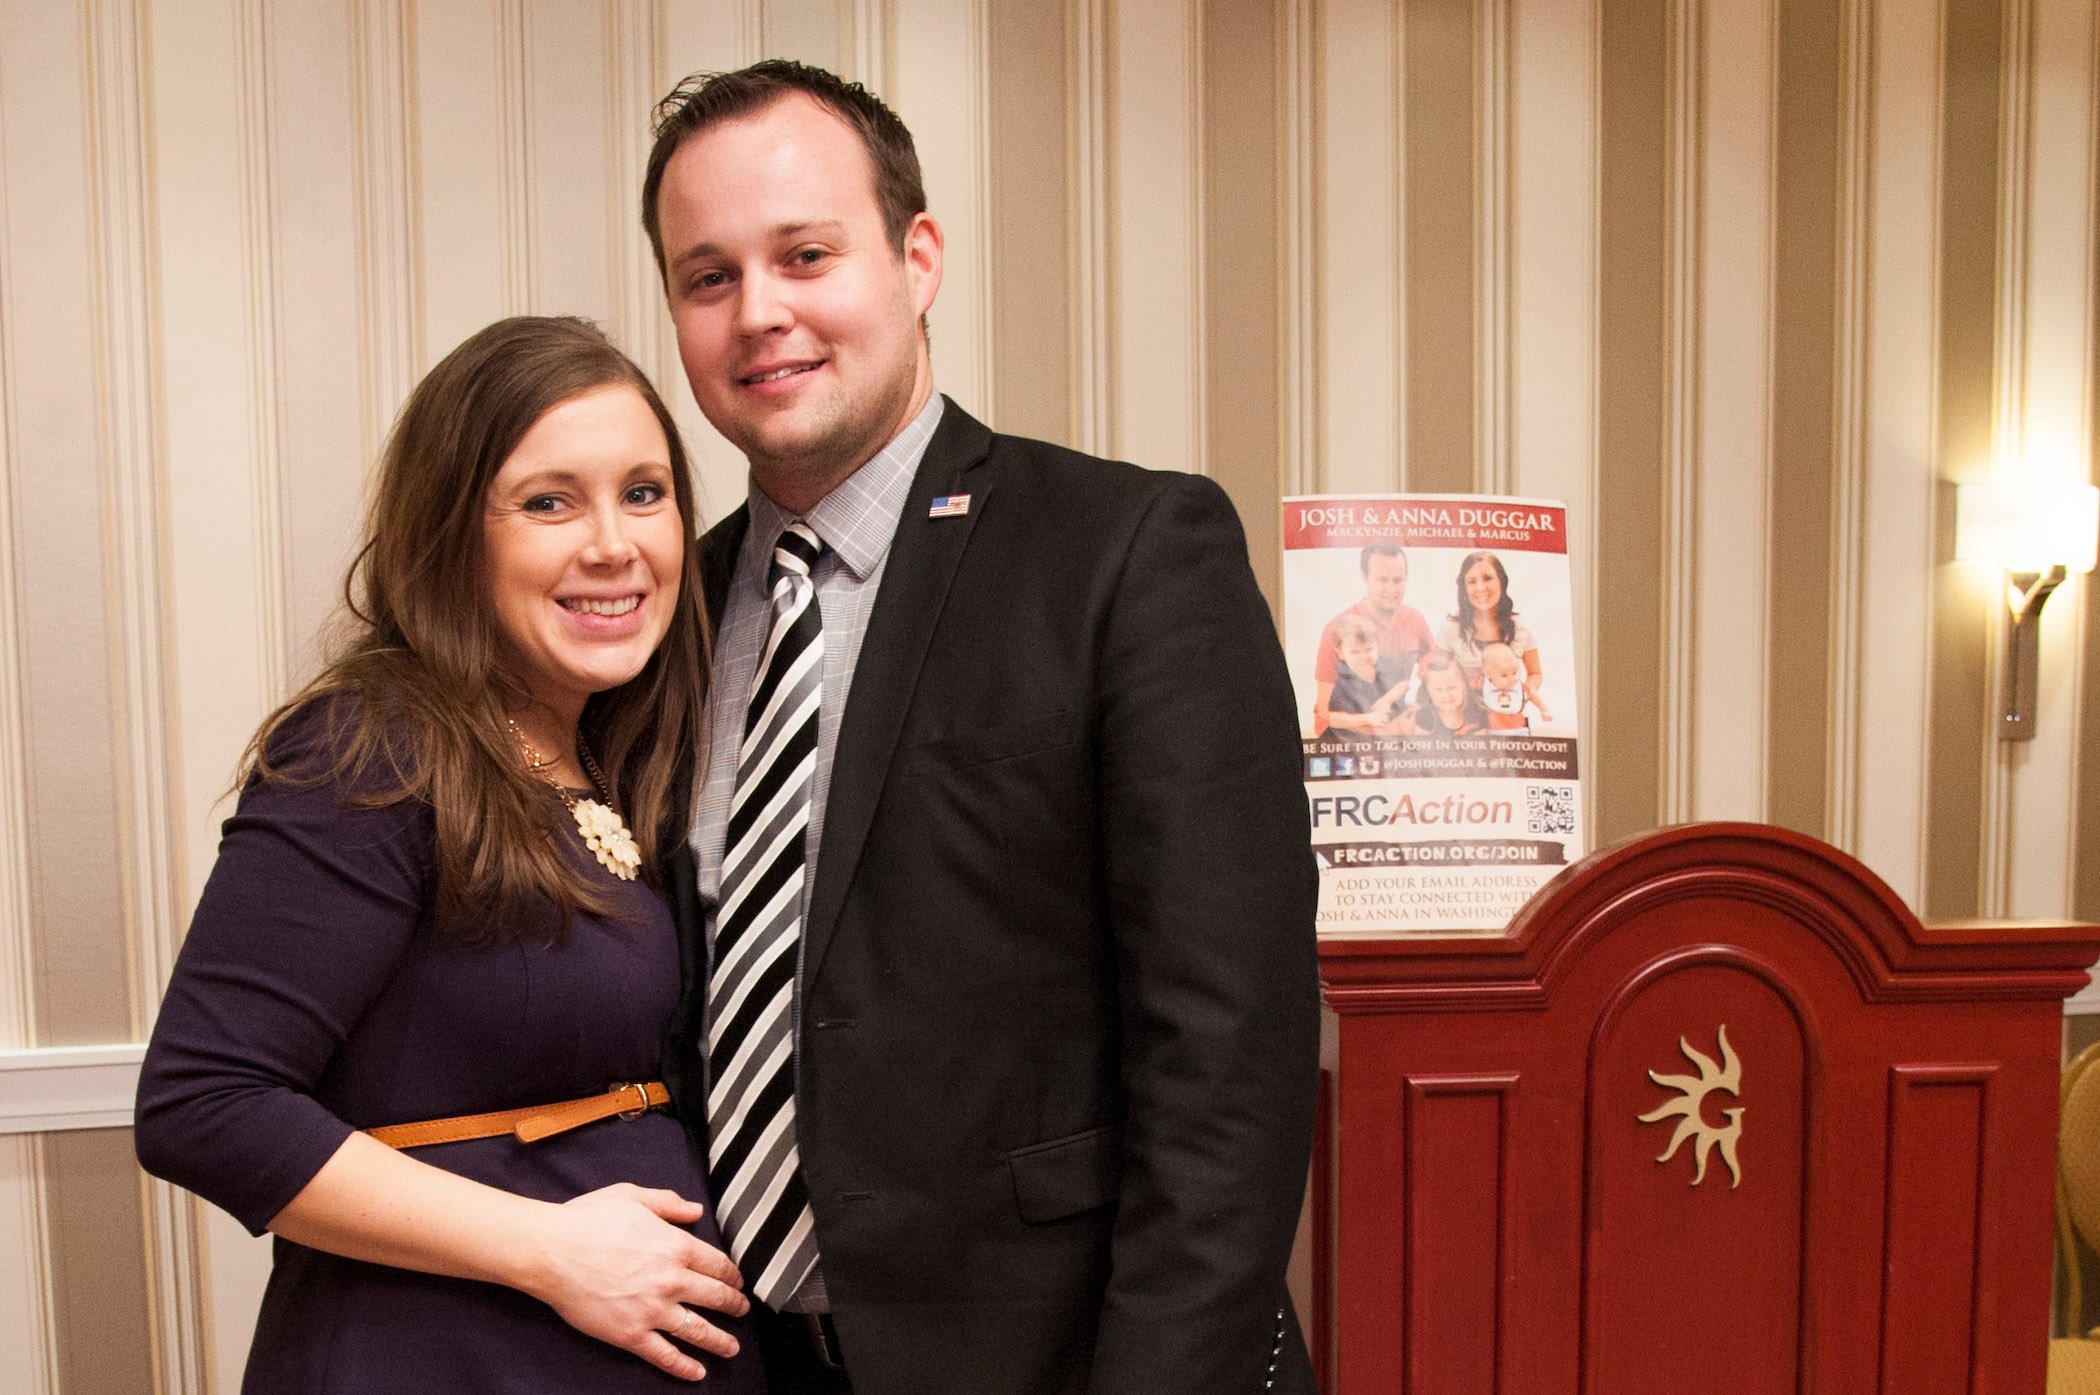 Josh Duggar and Anna Duggar standing next to each other and smiling. Anna Duggar is pregnant.